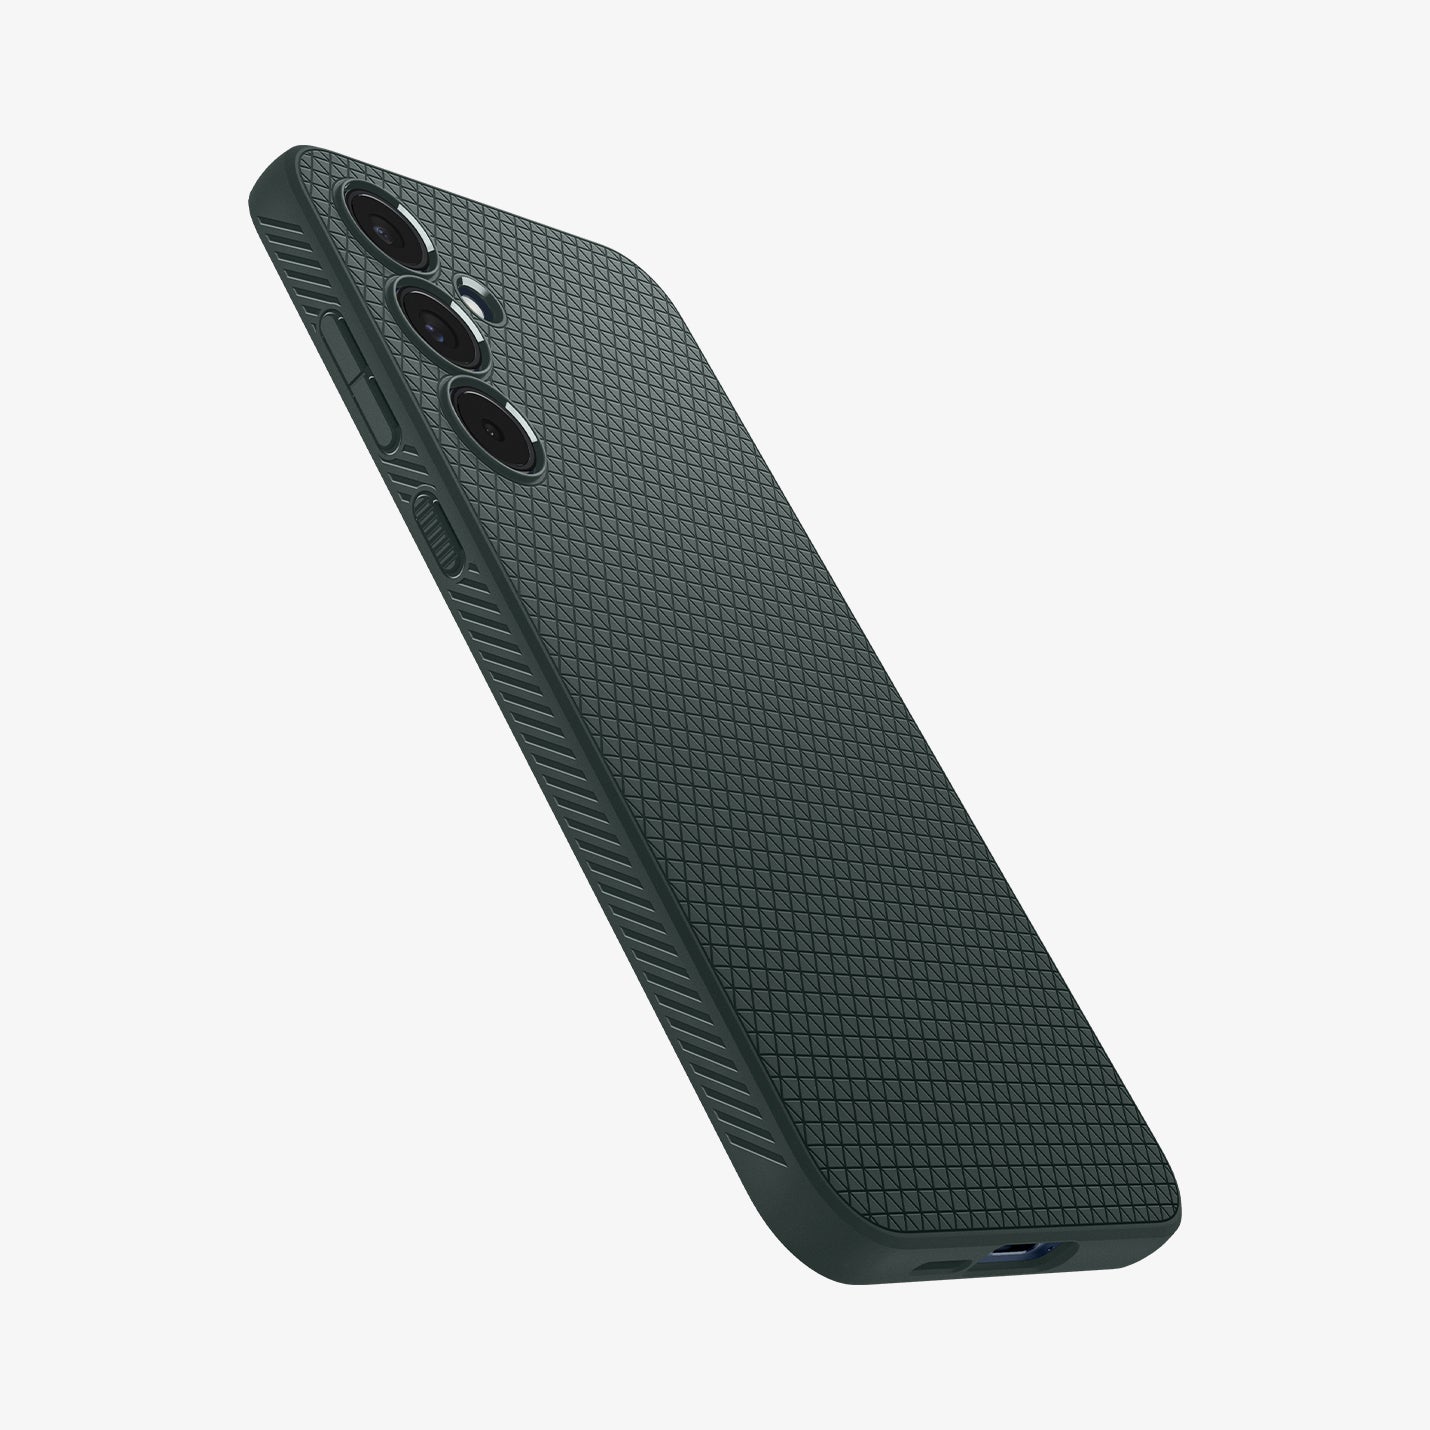 ACS07527 - Galaxy A55 5G Case Liquid Air in Abyss Green showing the back, partial sides with side buttons and partial bottom